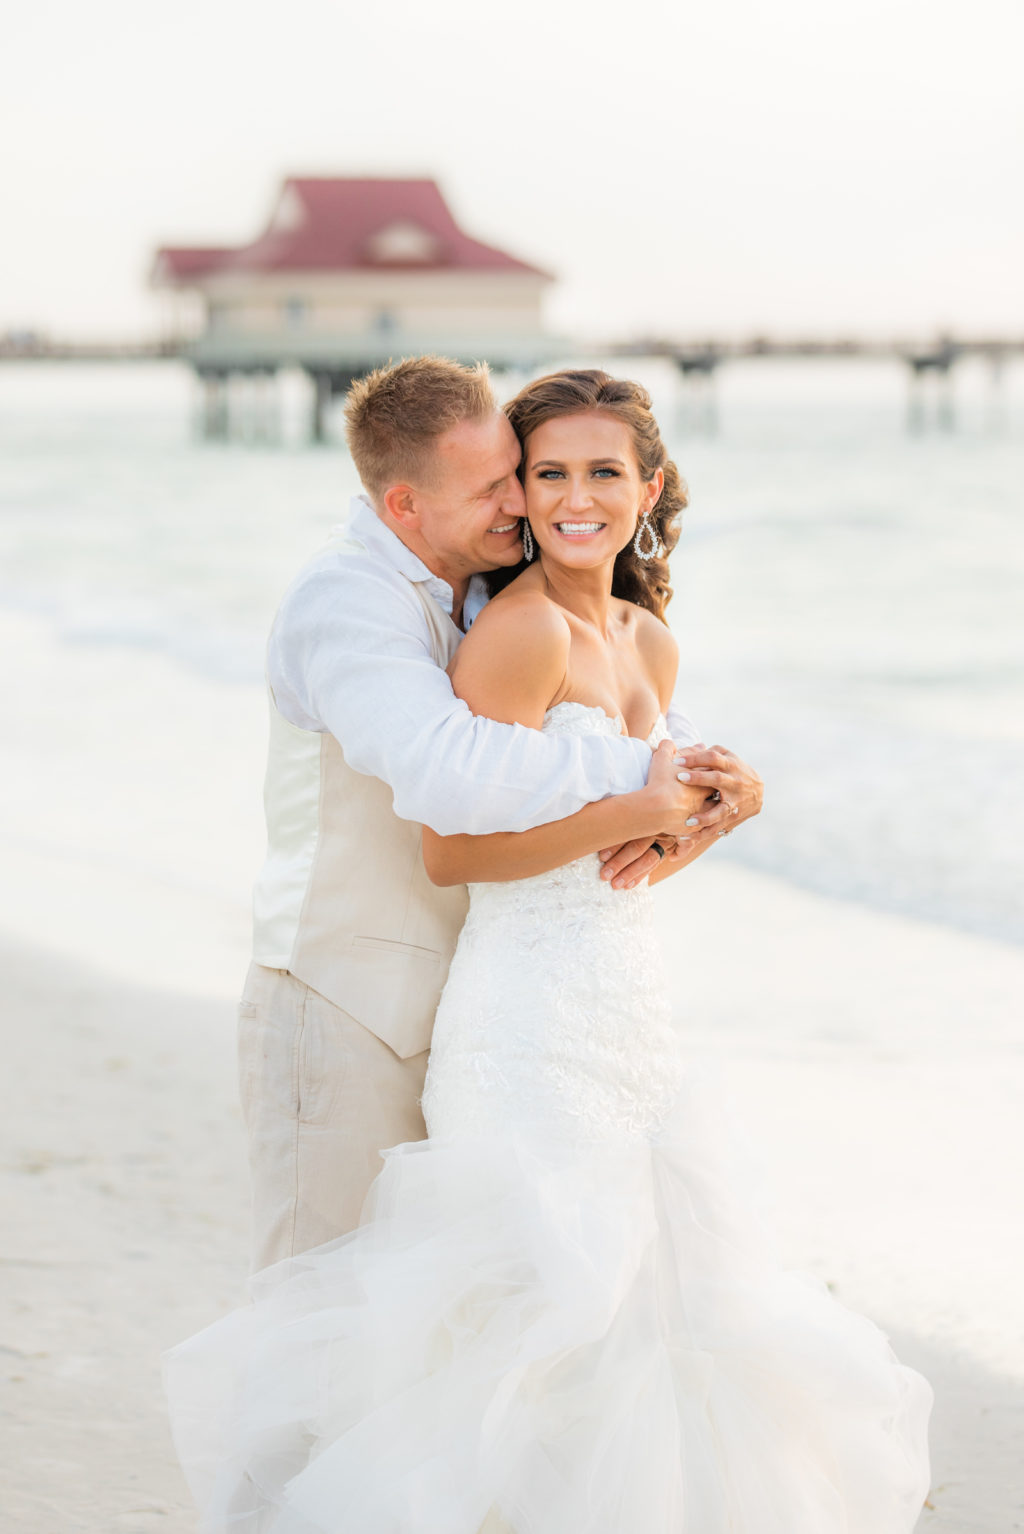 Romantic Bride and Groom on Wedding Venue Hilton Clearwater Beach